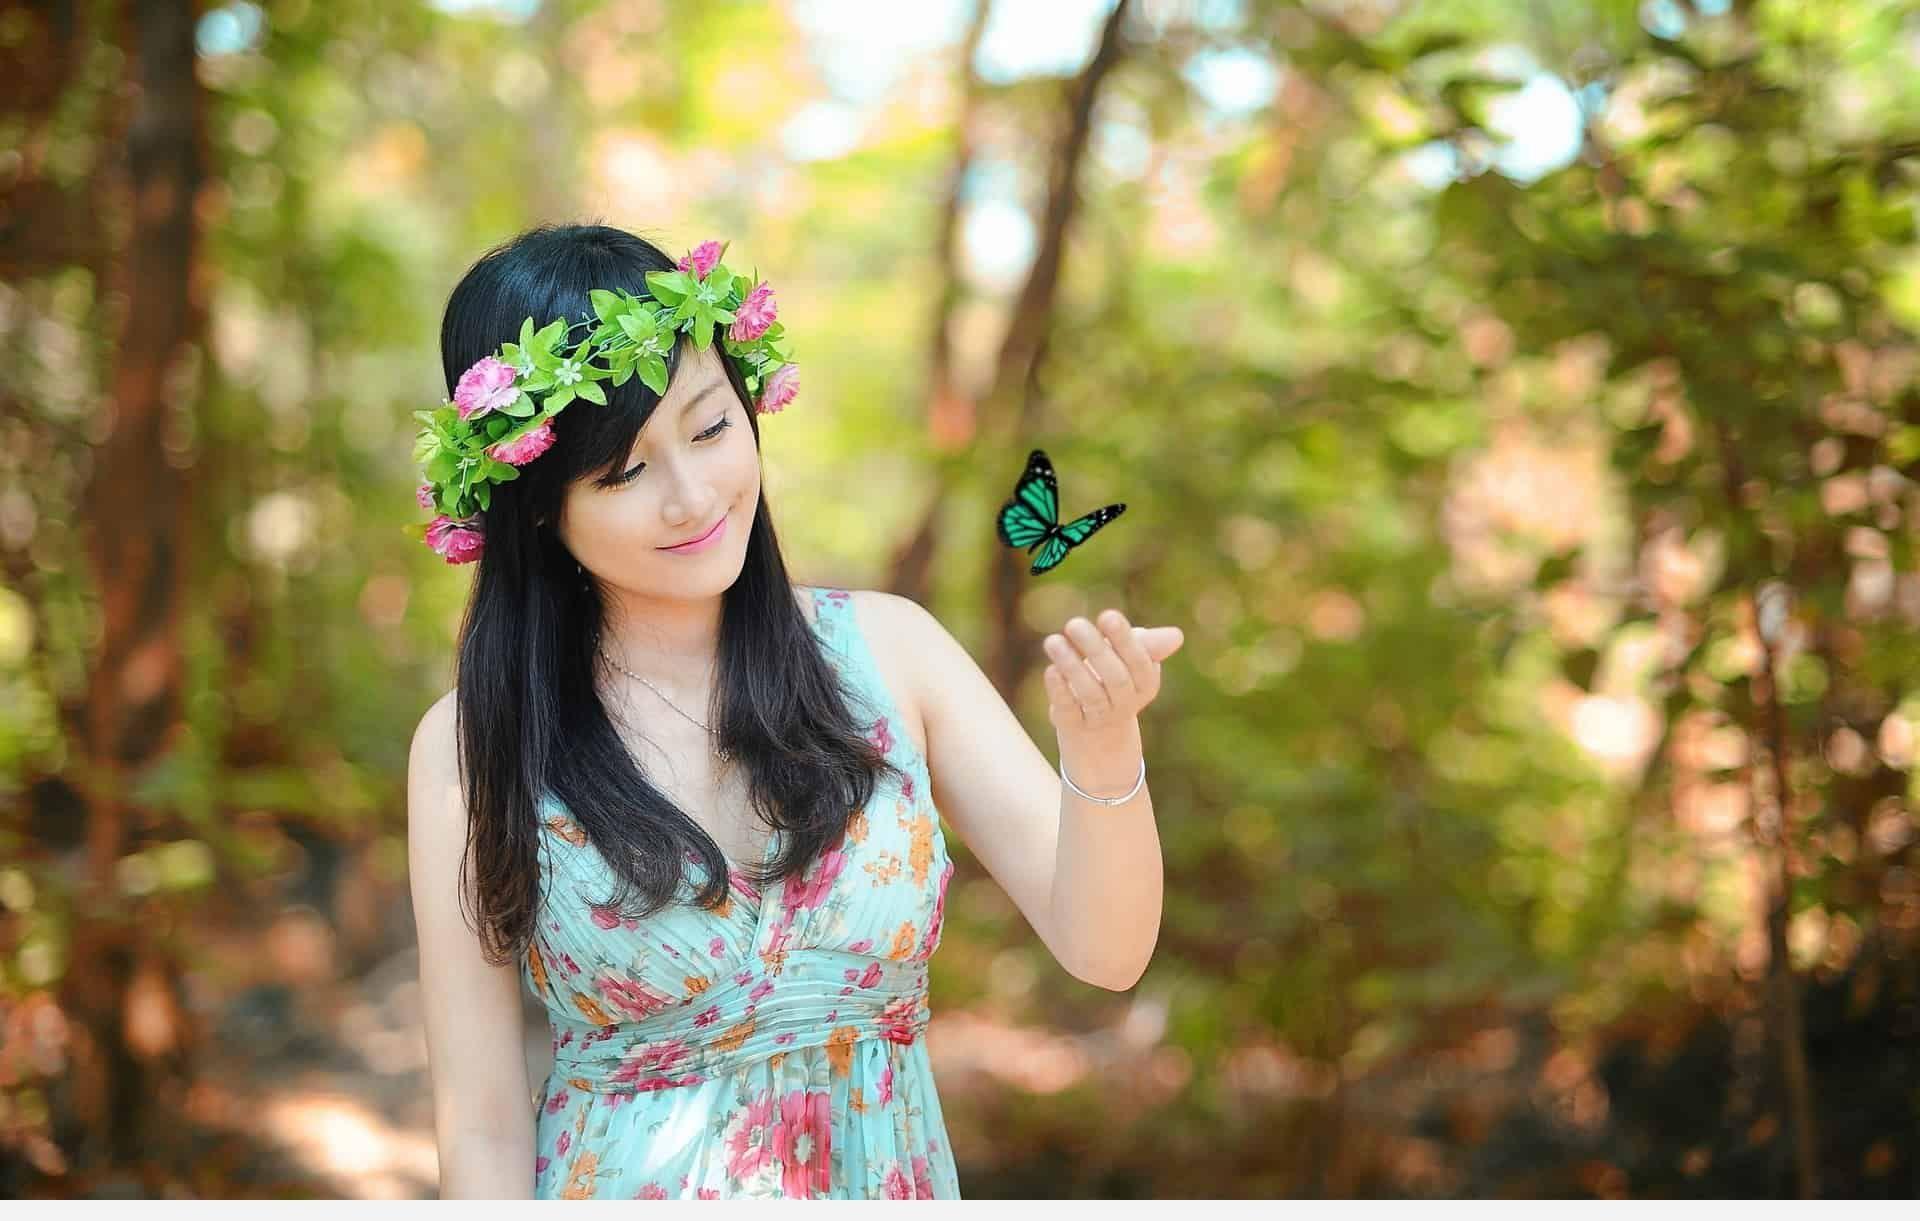 Butterfly Girl Wallpaper Image With Girl